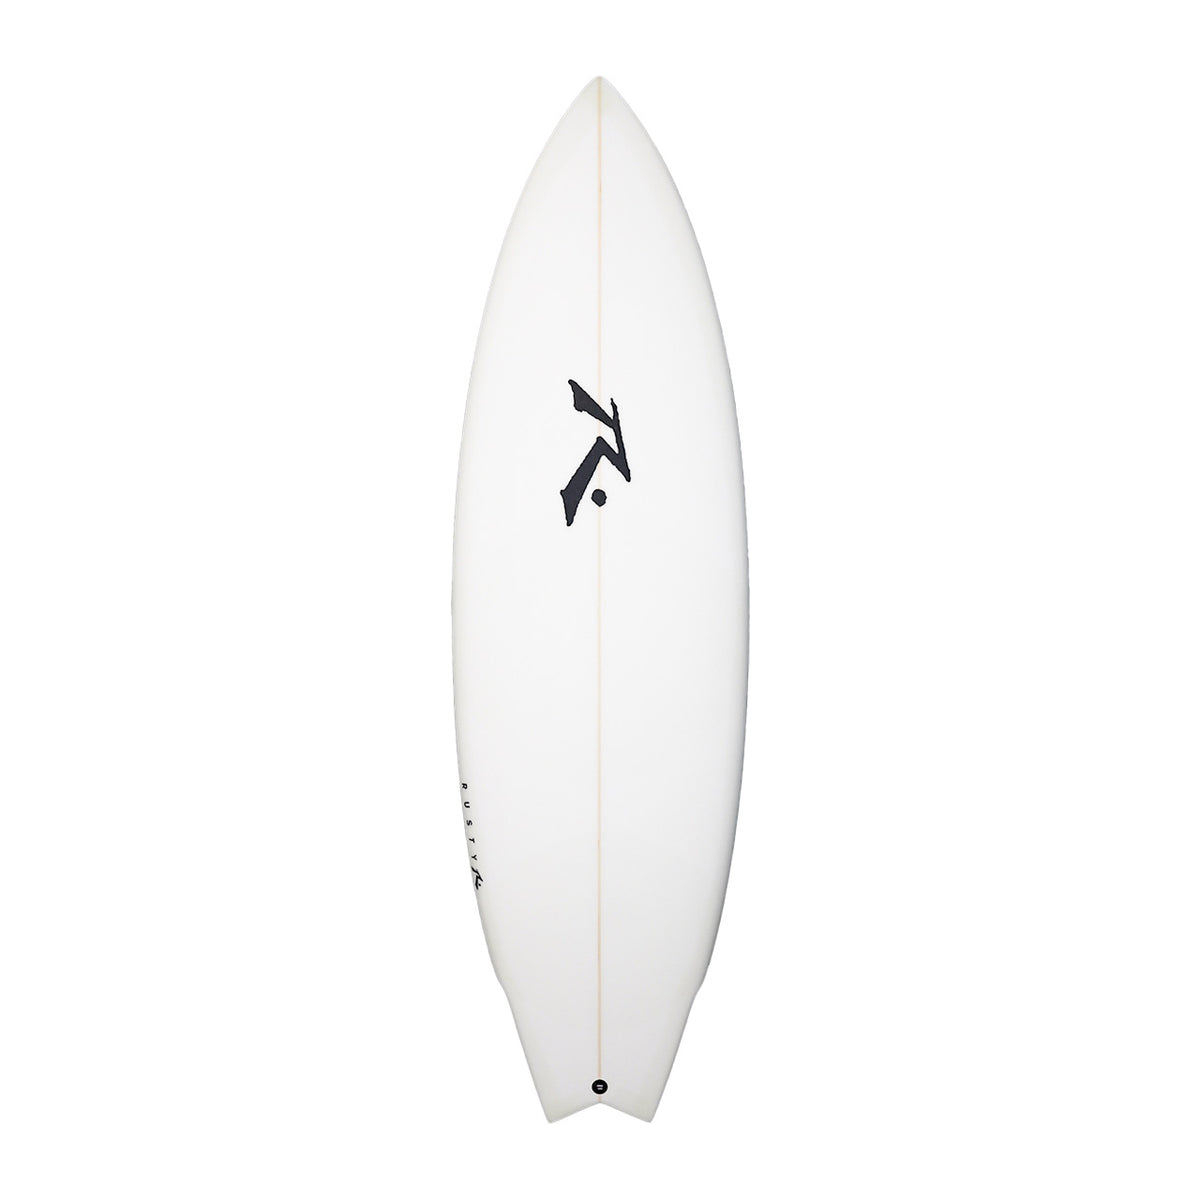 The Deuce - In Stock - High Performance Twin Fin - Deck View - Rusty Surfboards